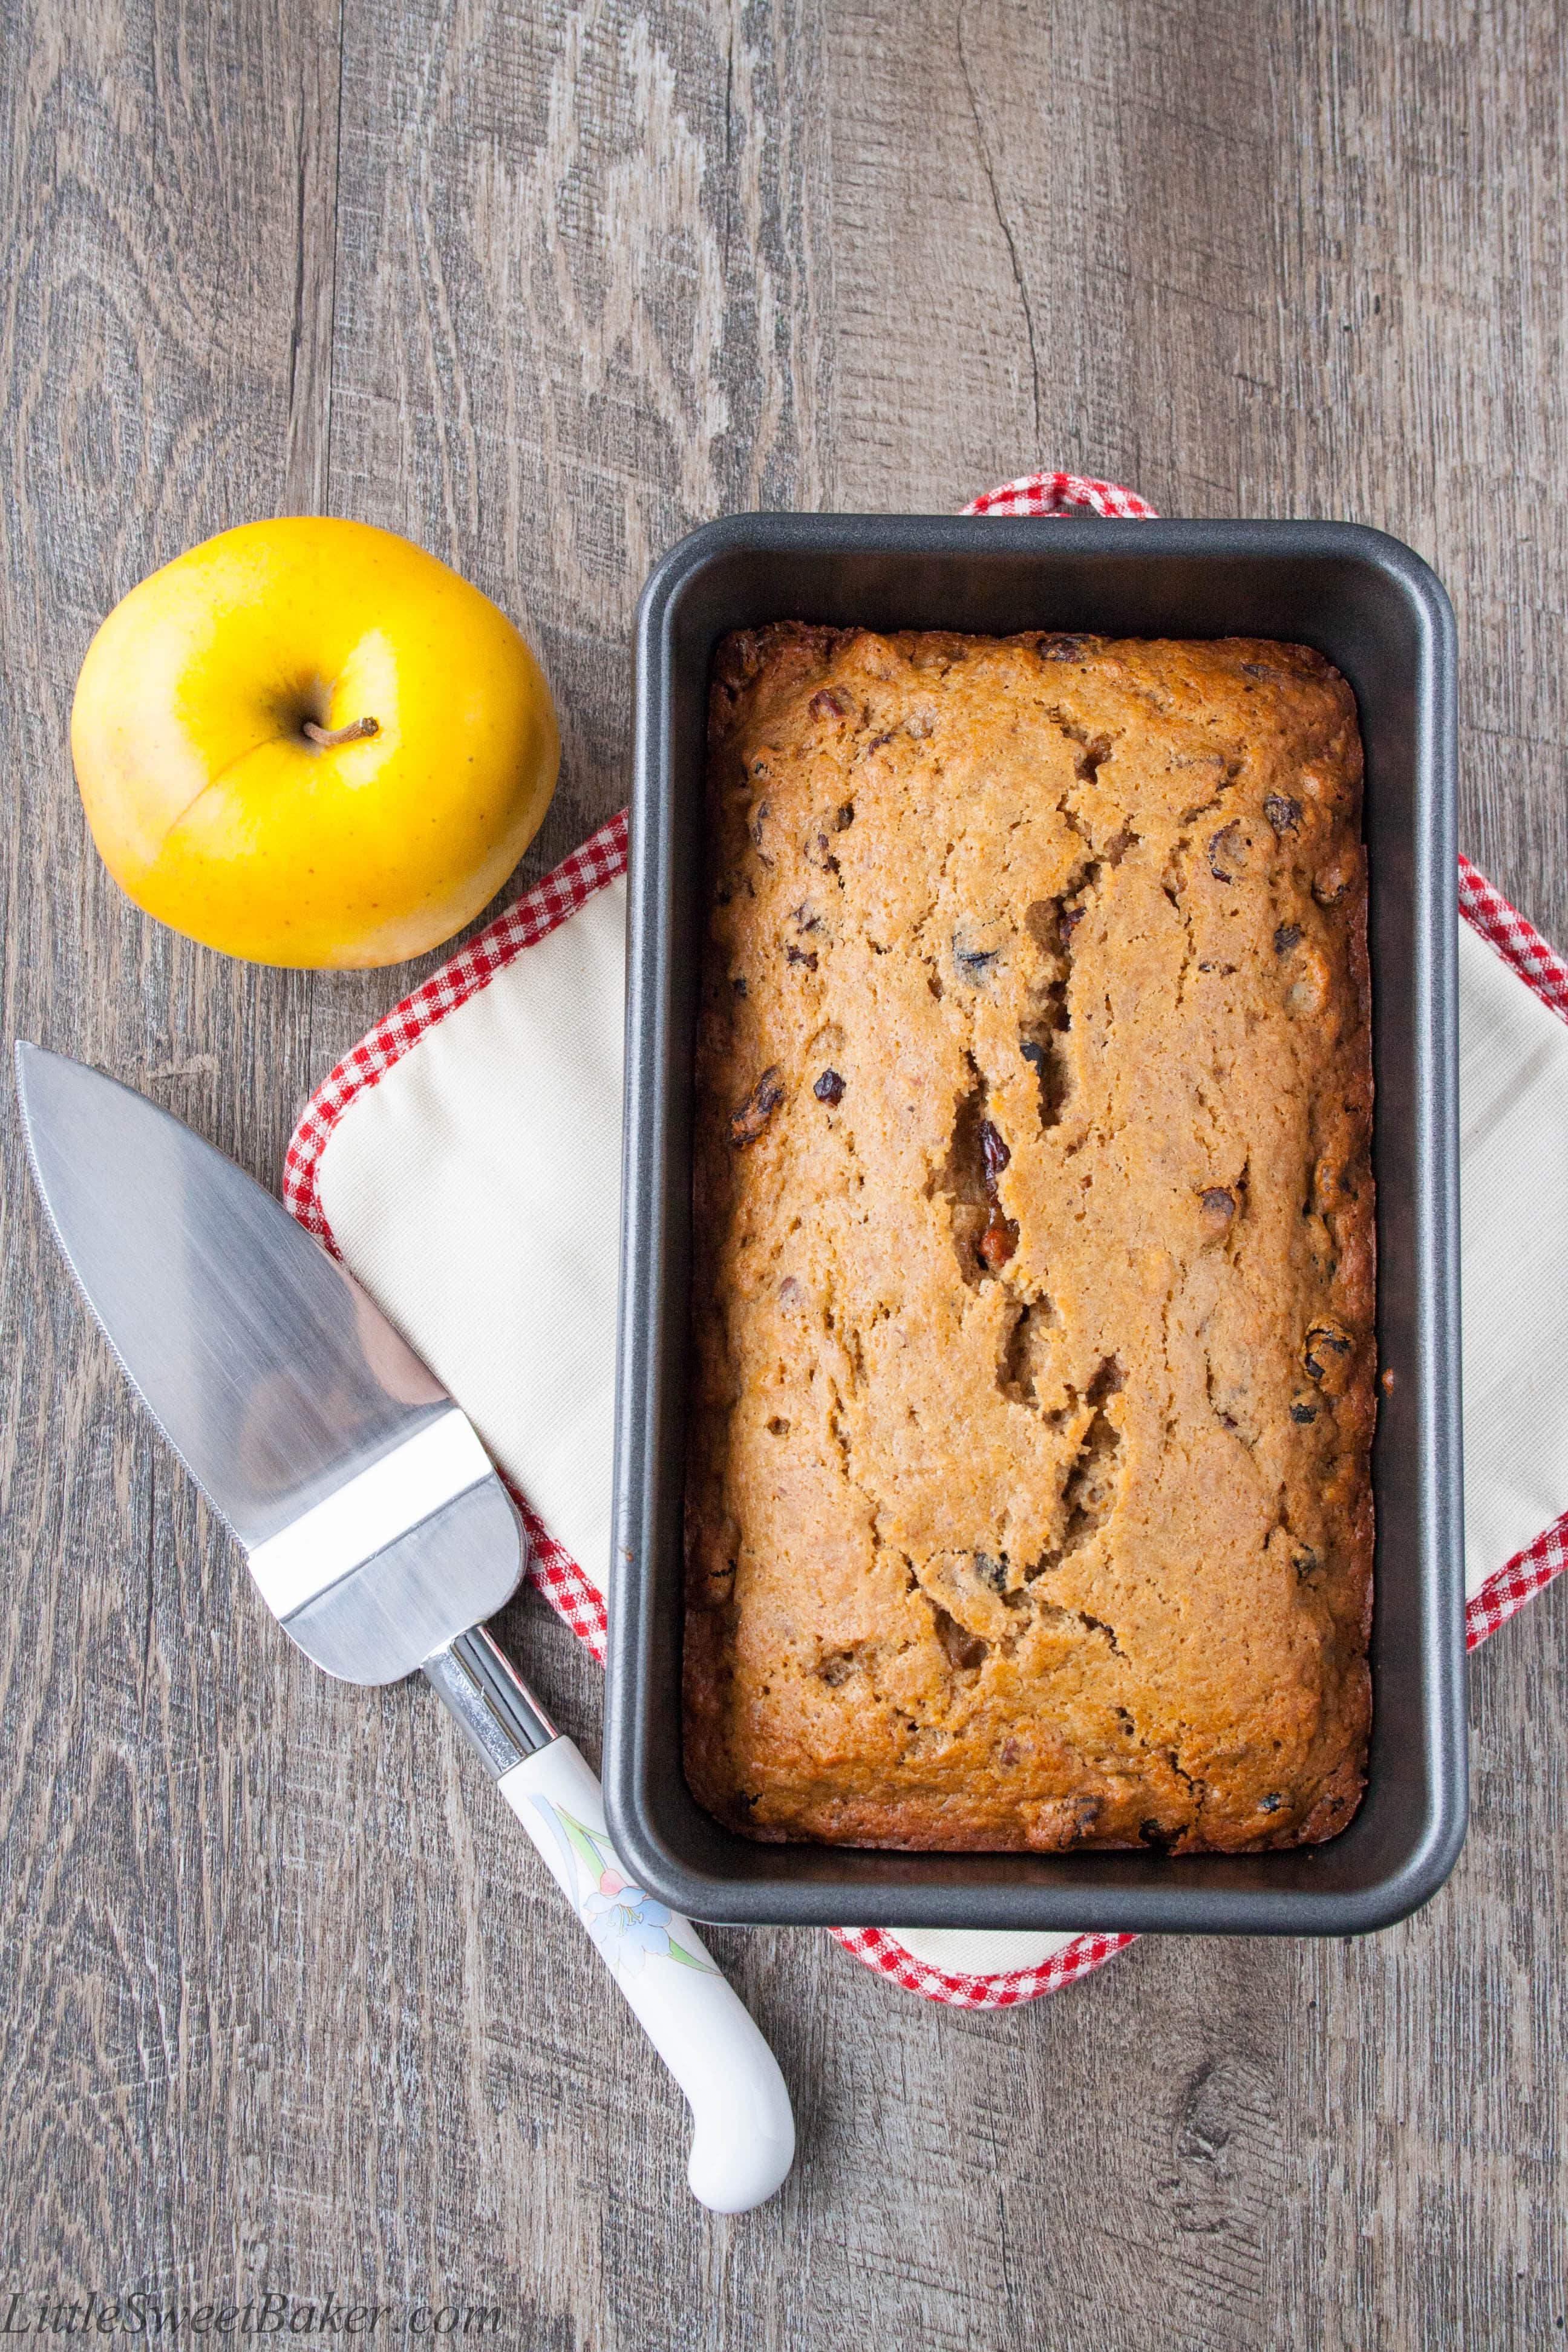 FRUIT & CINNAMON APPLESAUCE BREAD. A delicious, soft and moist cinnamon applesauce bread loaded with yummy fruits and nuts.